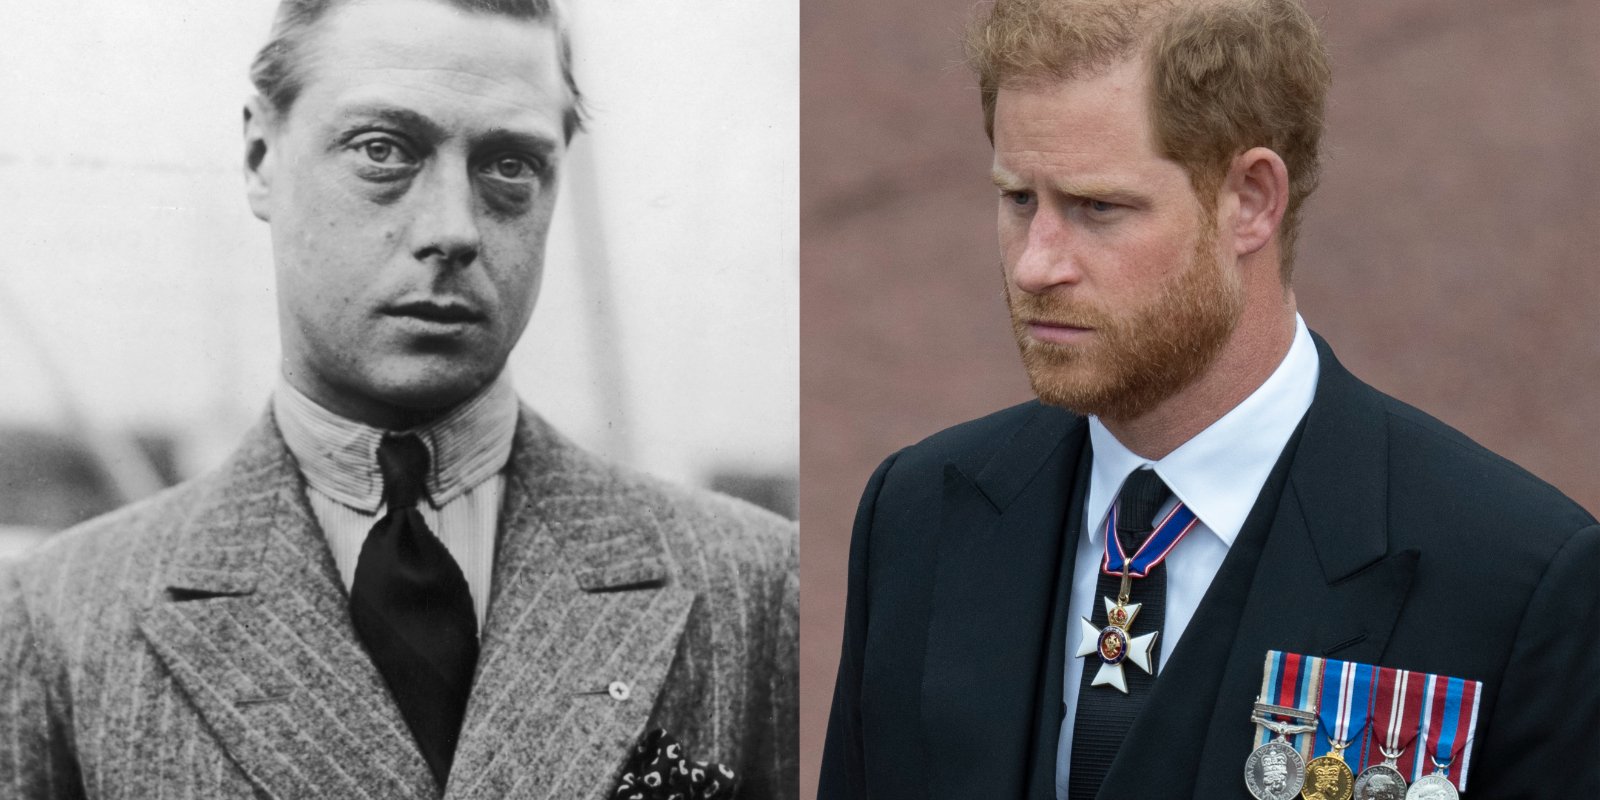 King Edward VIII and Prince Harry in side by side photographs.